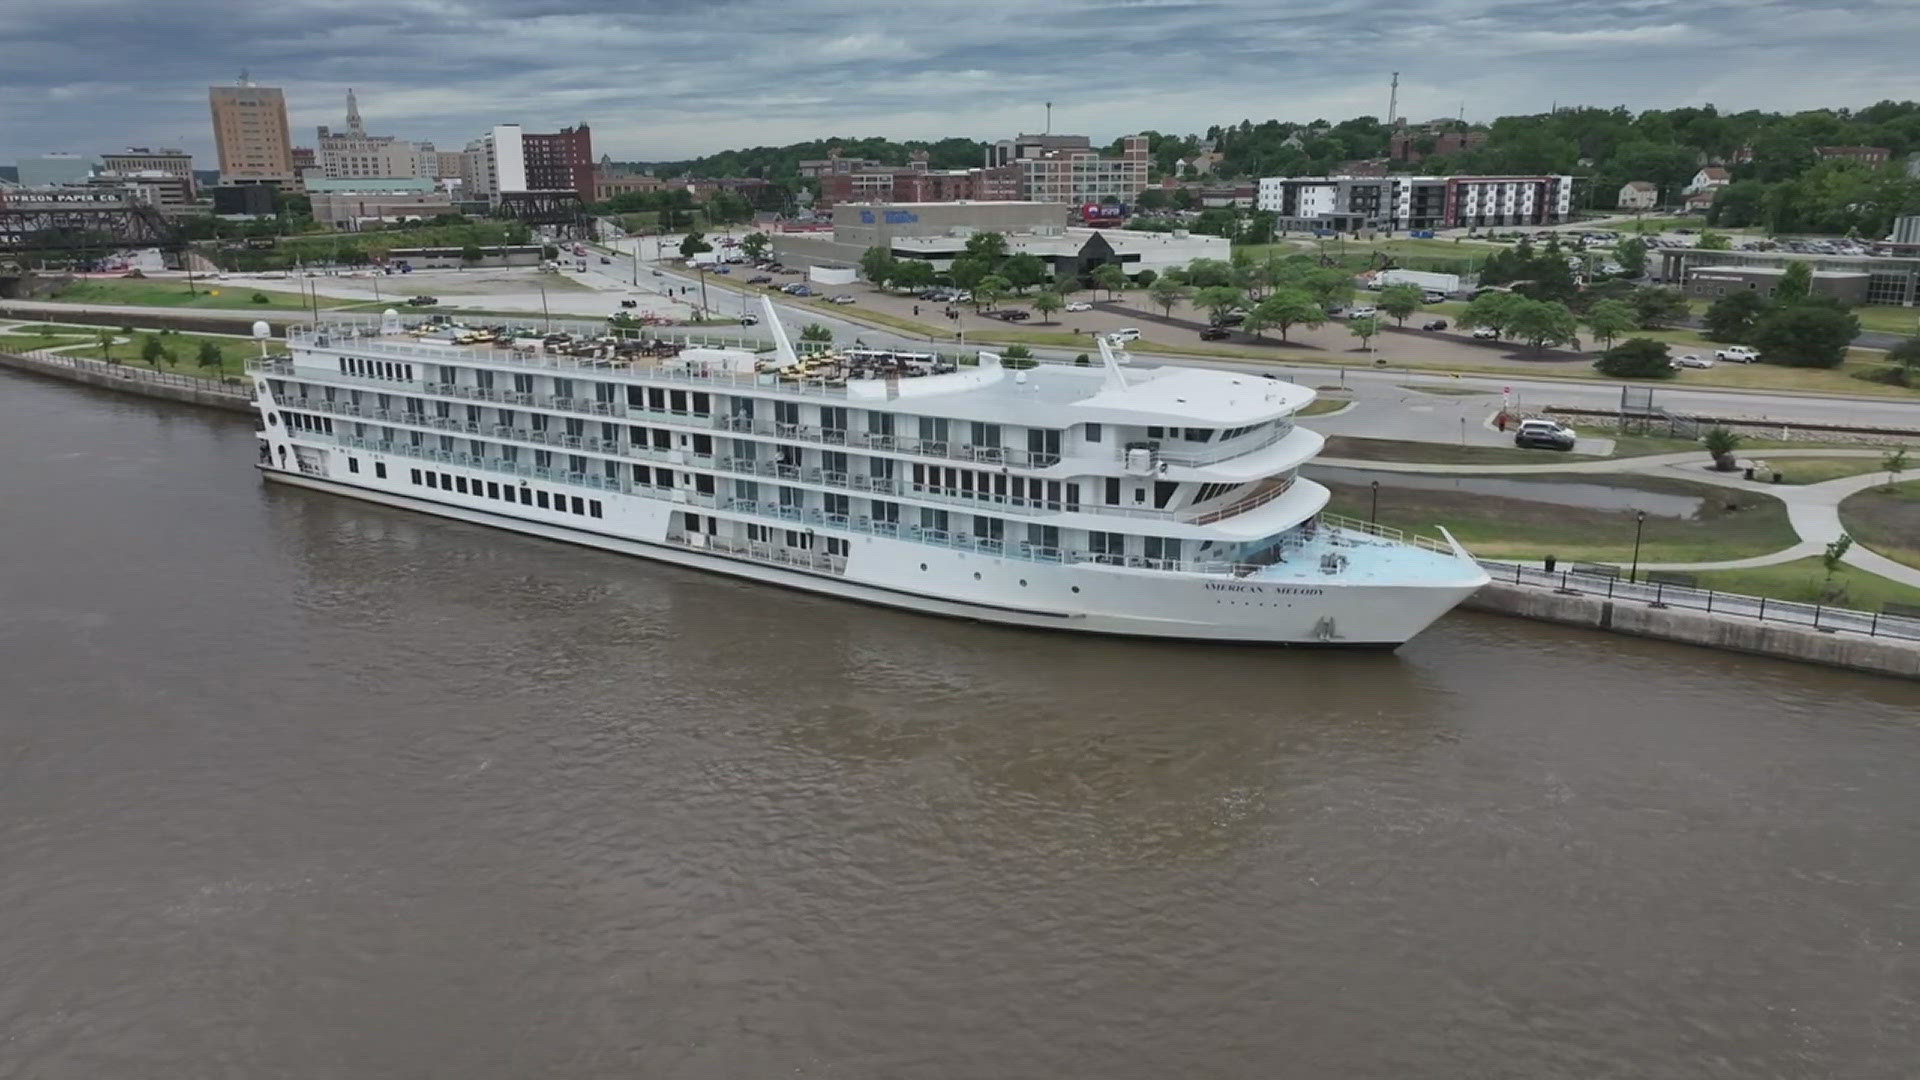 American Cruise Lines' "American Melody" stopped in Davenport Wednesday with more than 170 people on board.